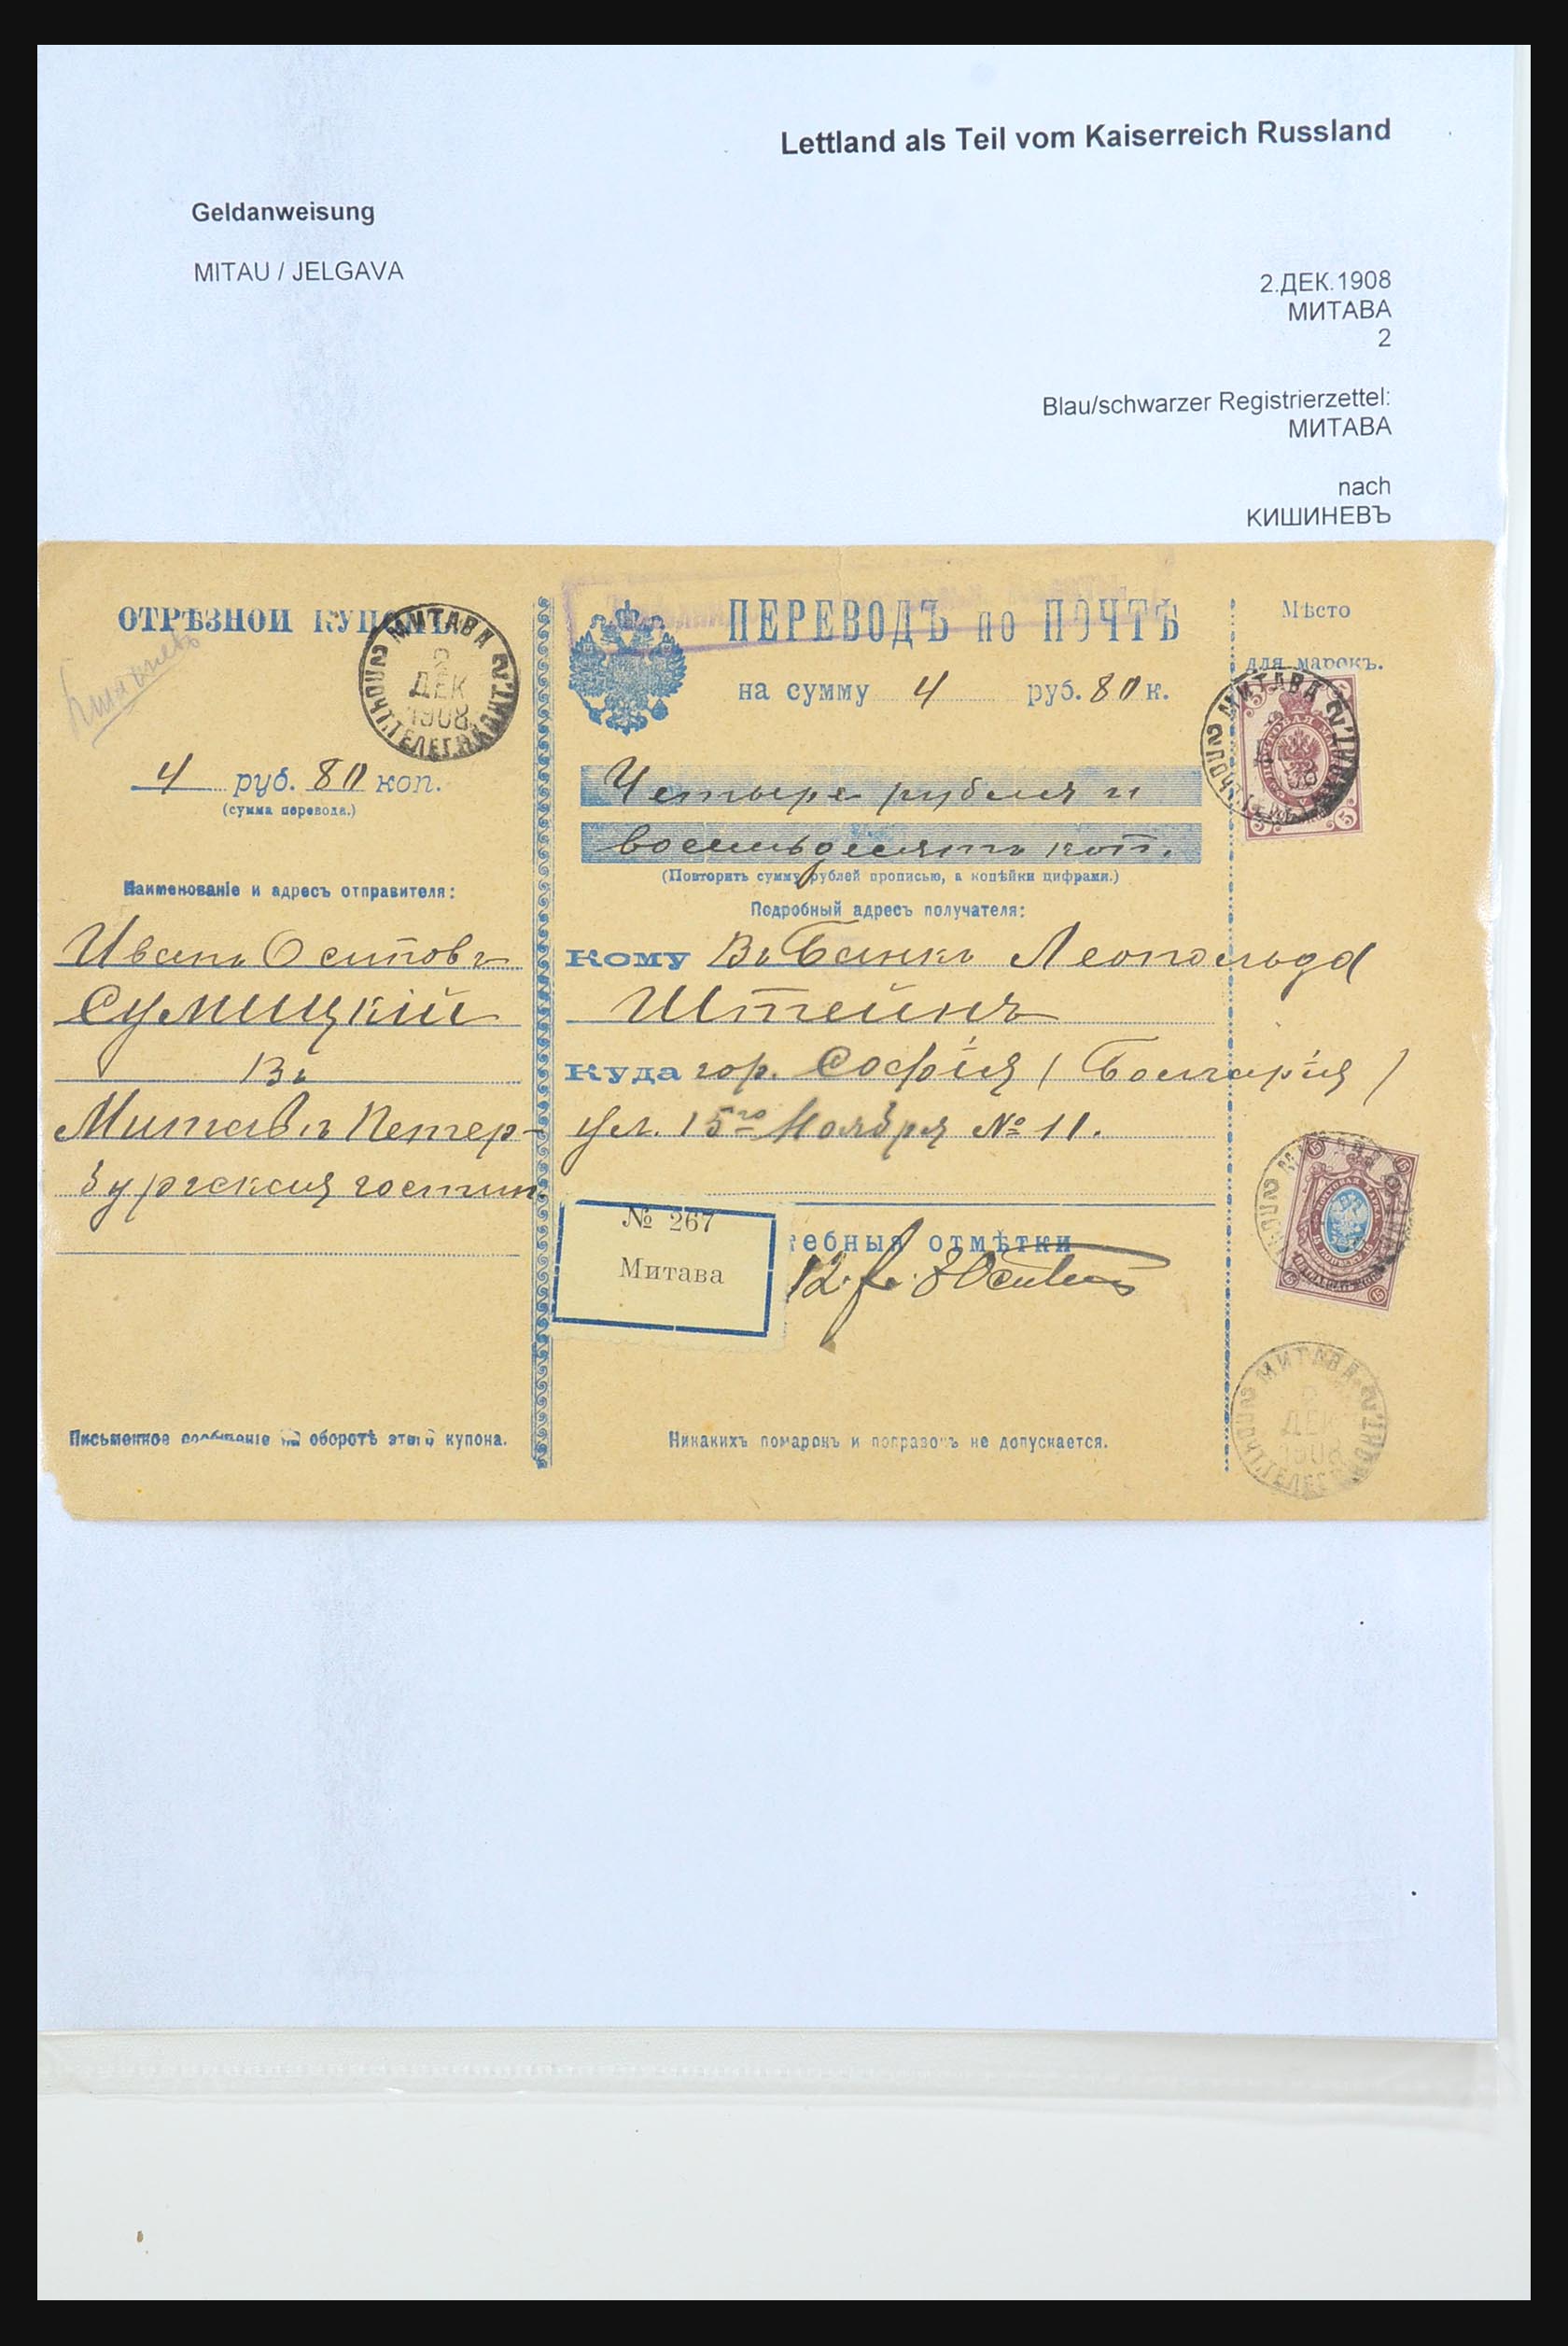 31305 022 - 31305 Latvia as part of Russia 1817-1918.